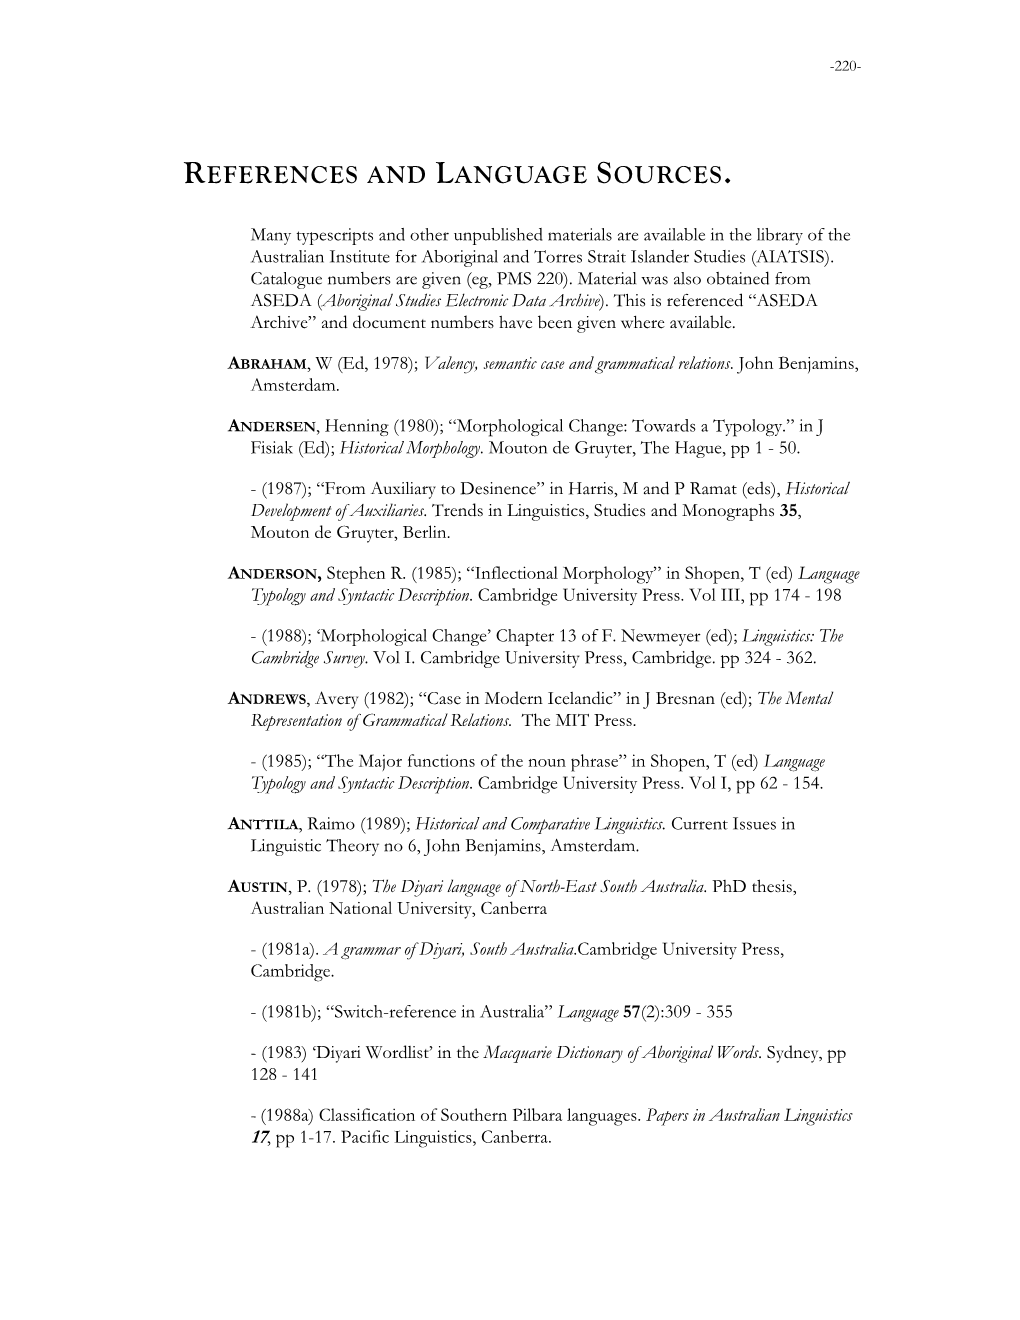 References and Language Sources